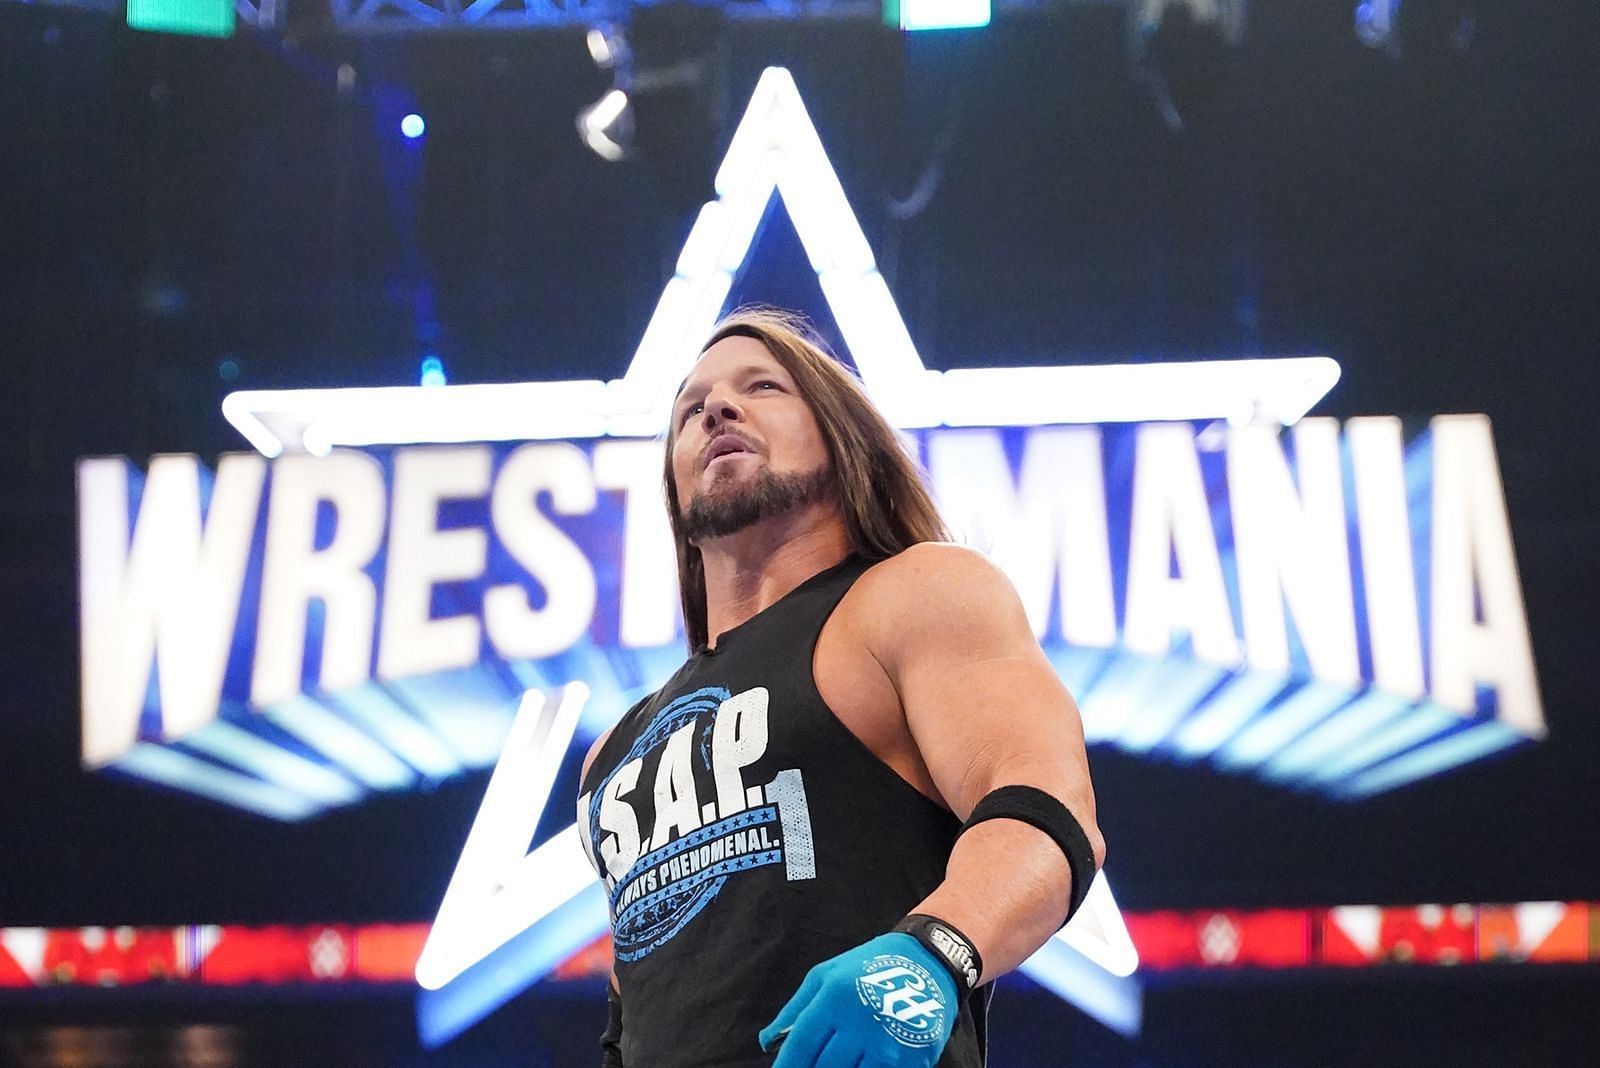 AJ Styles is a former WWE Champion and is regarded as one of the greatest to step foot in the business